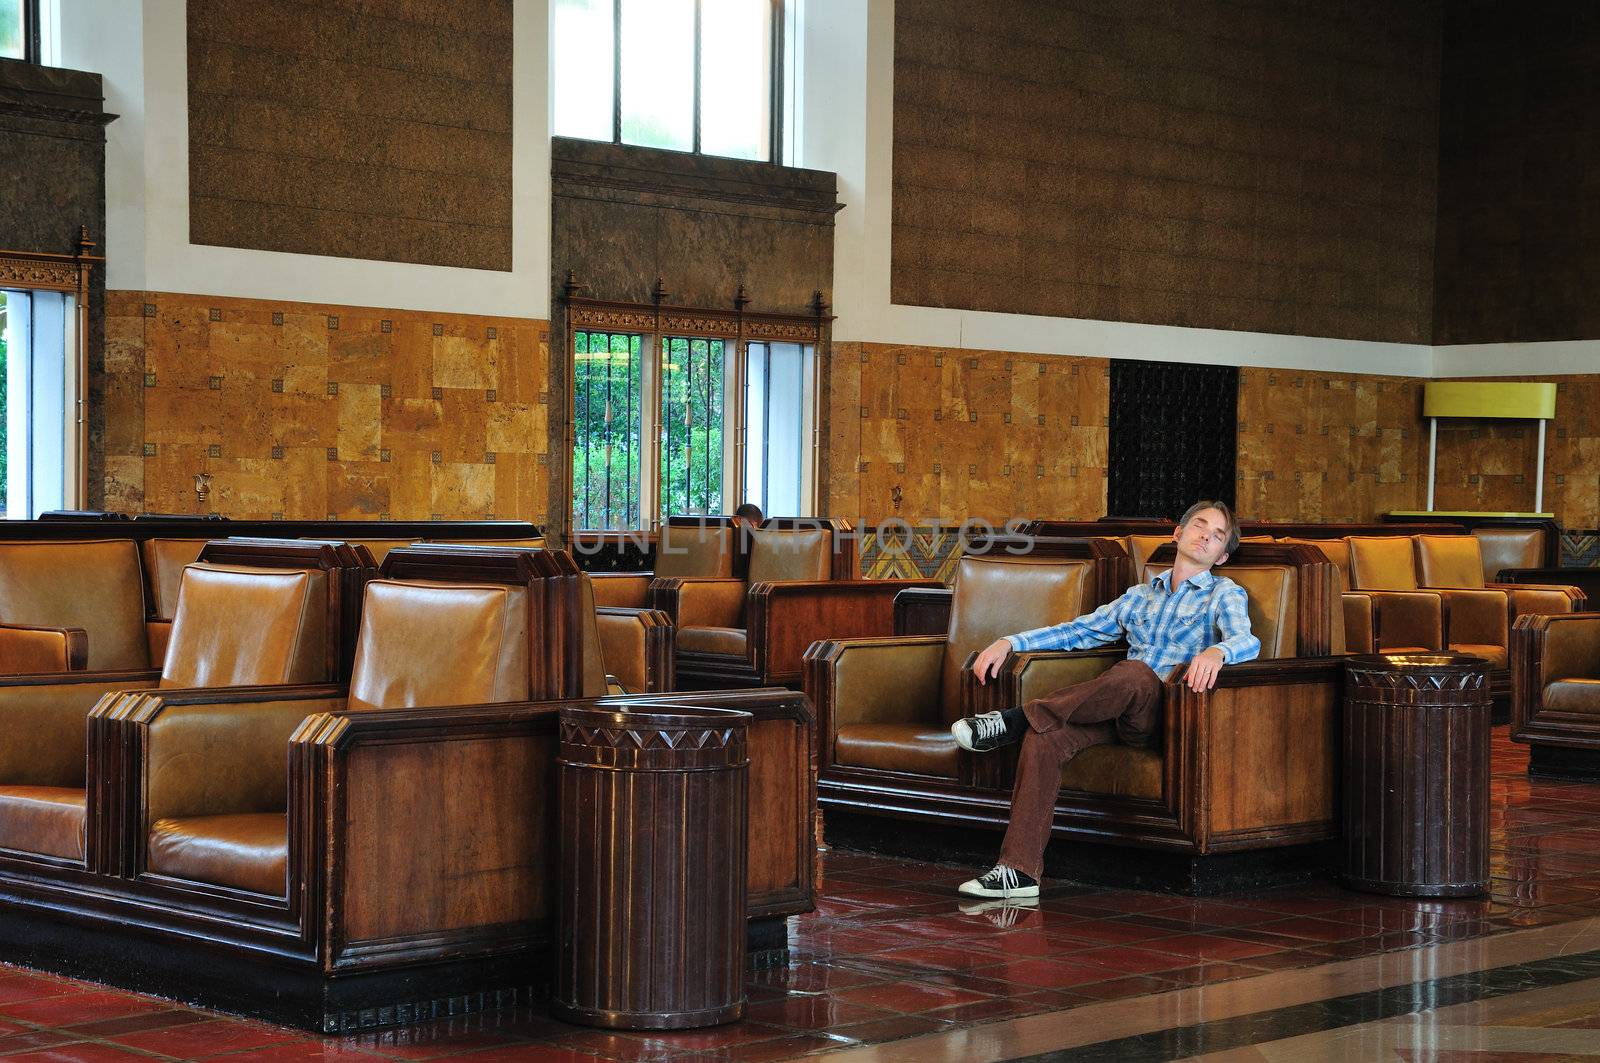 Passenger sleeps in the waiting room of Union Station in Los Angeles